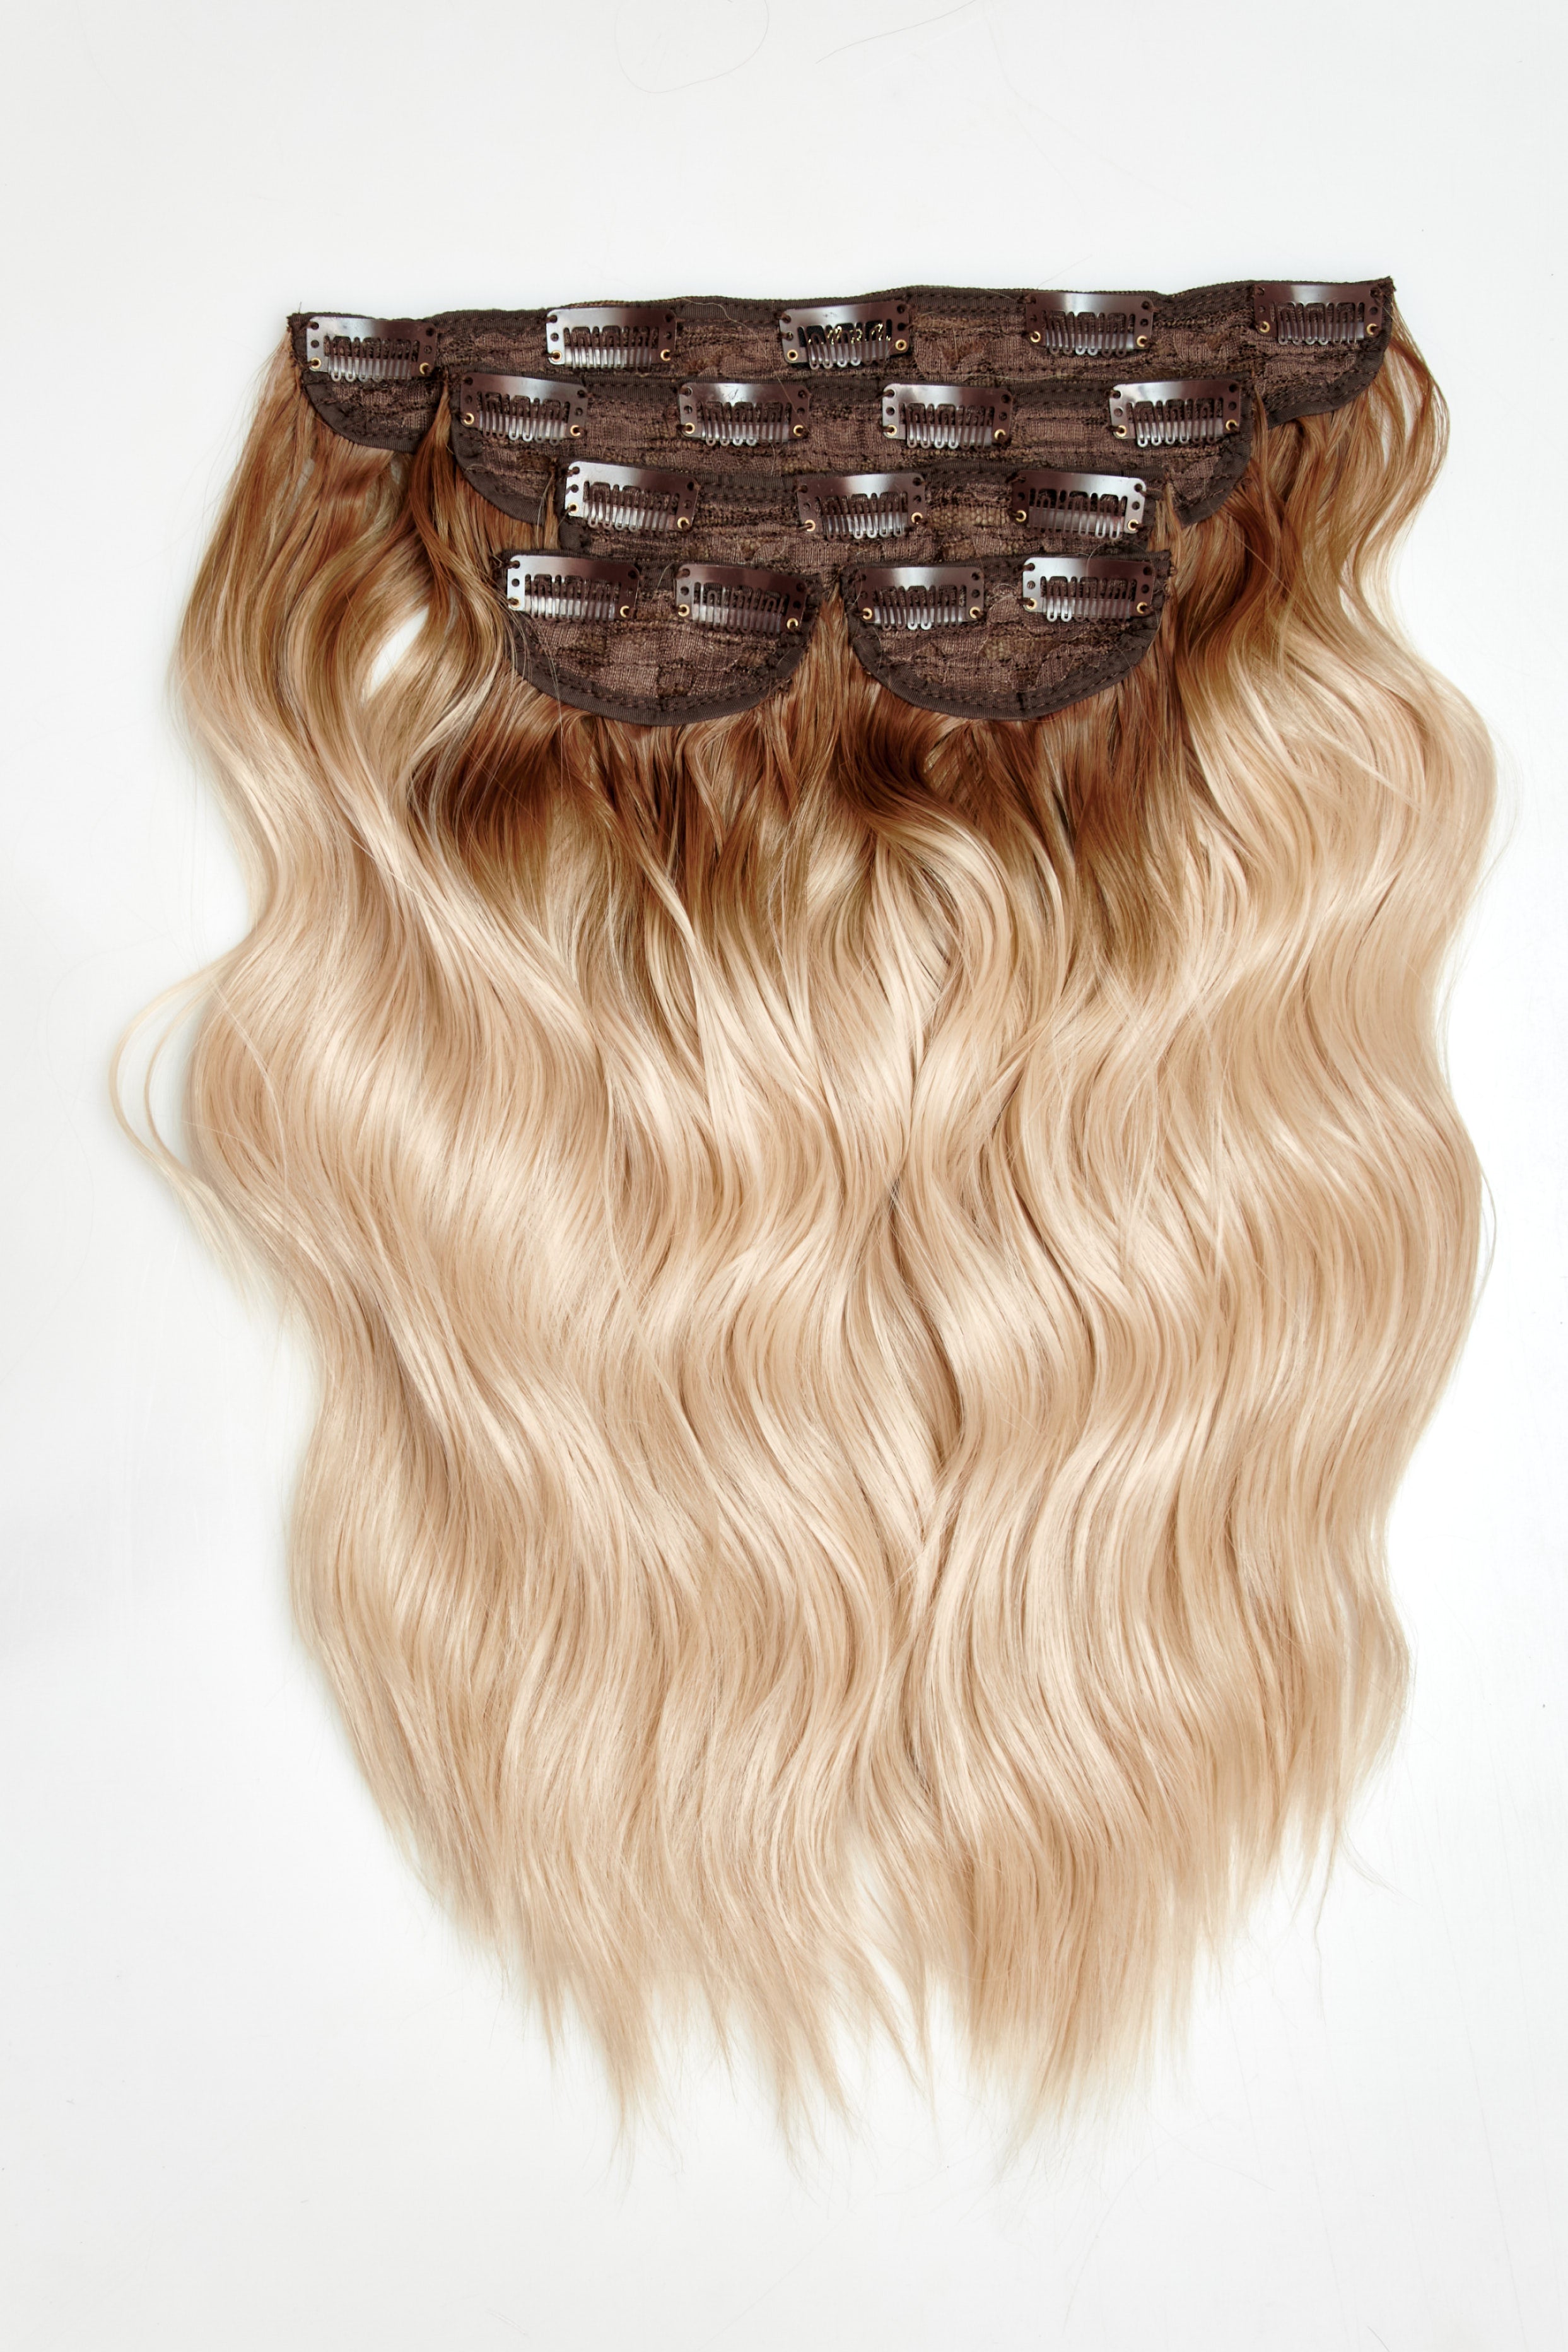 Super Thick 16’’ 5 Piece Brushed Out Wave Clip In Hair Extensions + Hair Care Bundle - Rooted Light Blonde